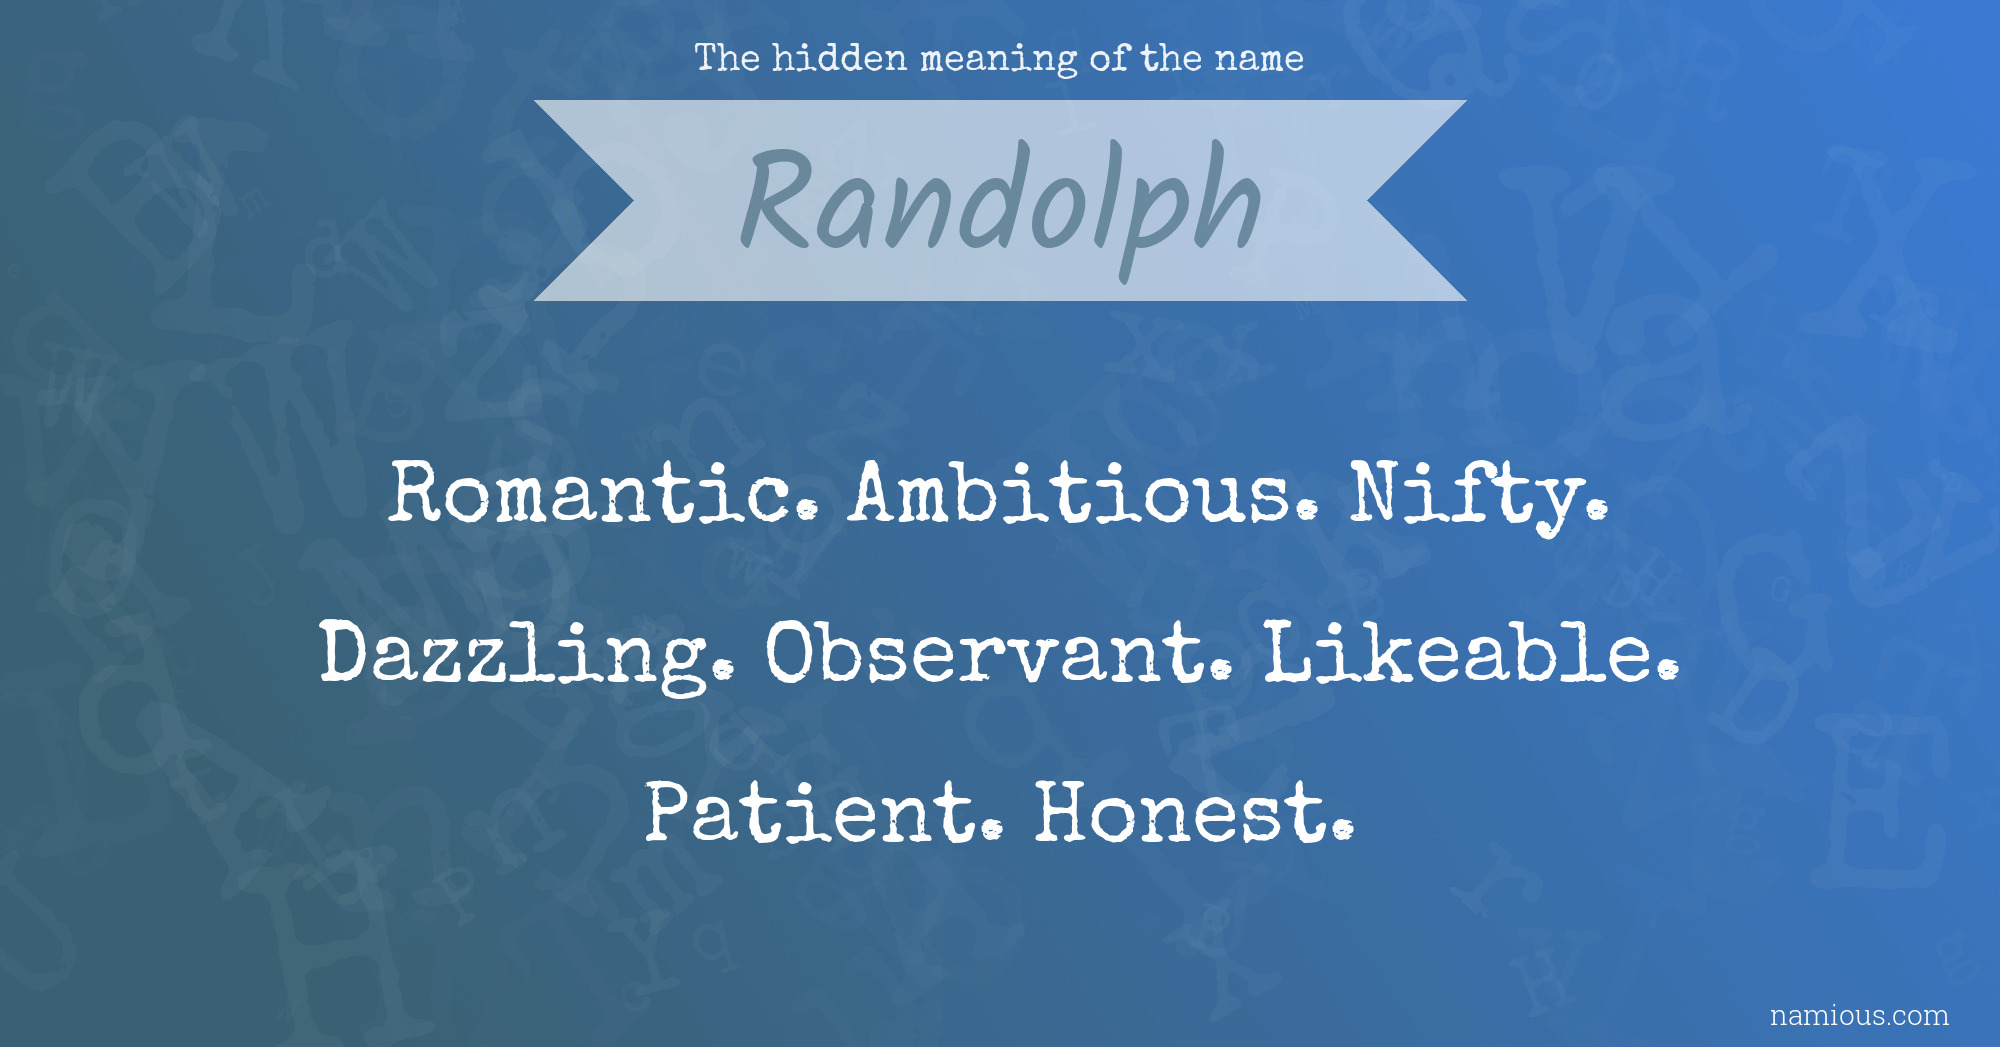 The hidden meaning of the name Randolph